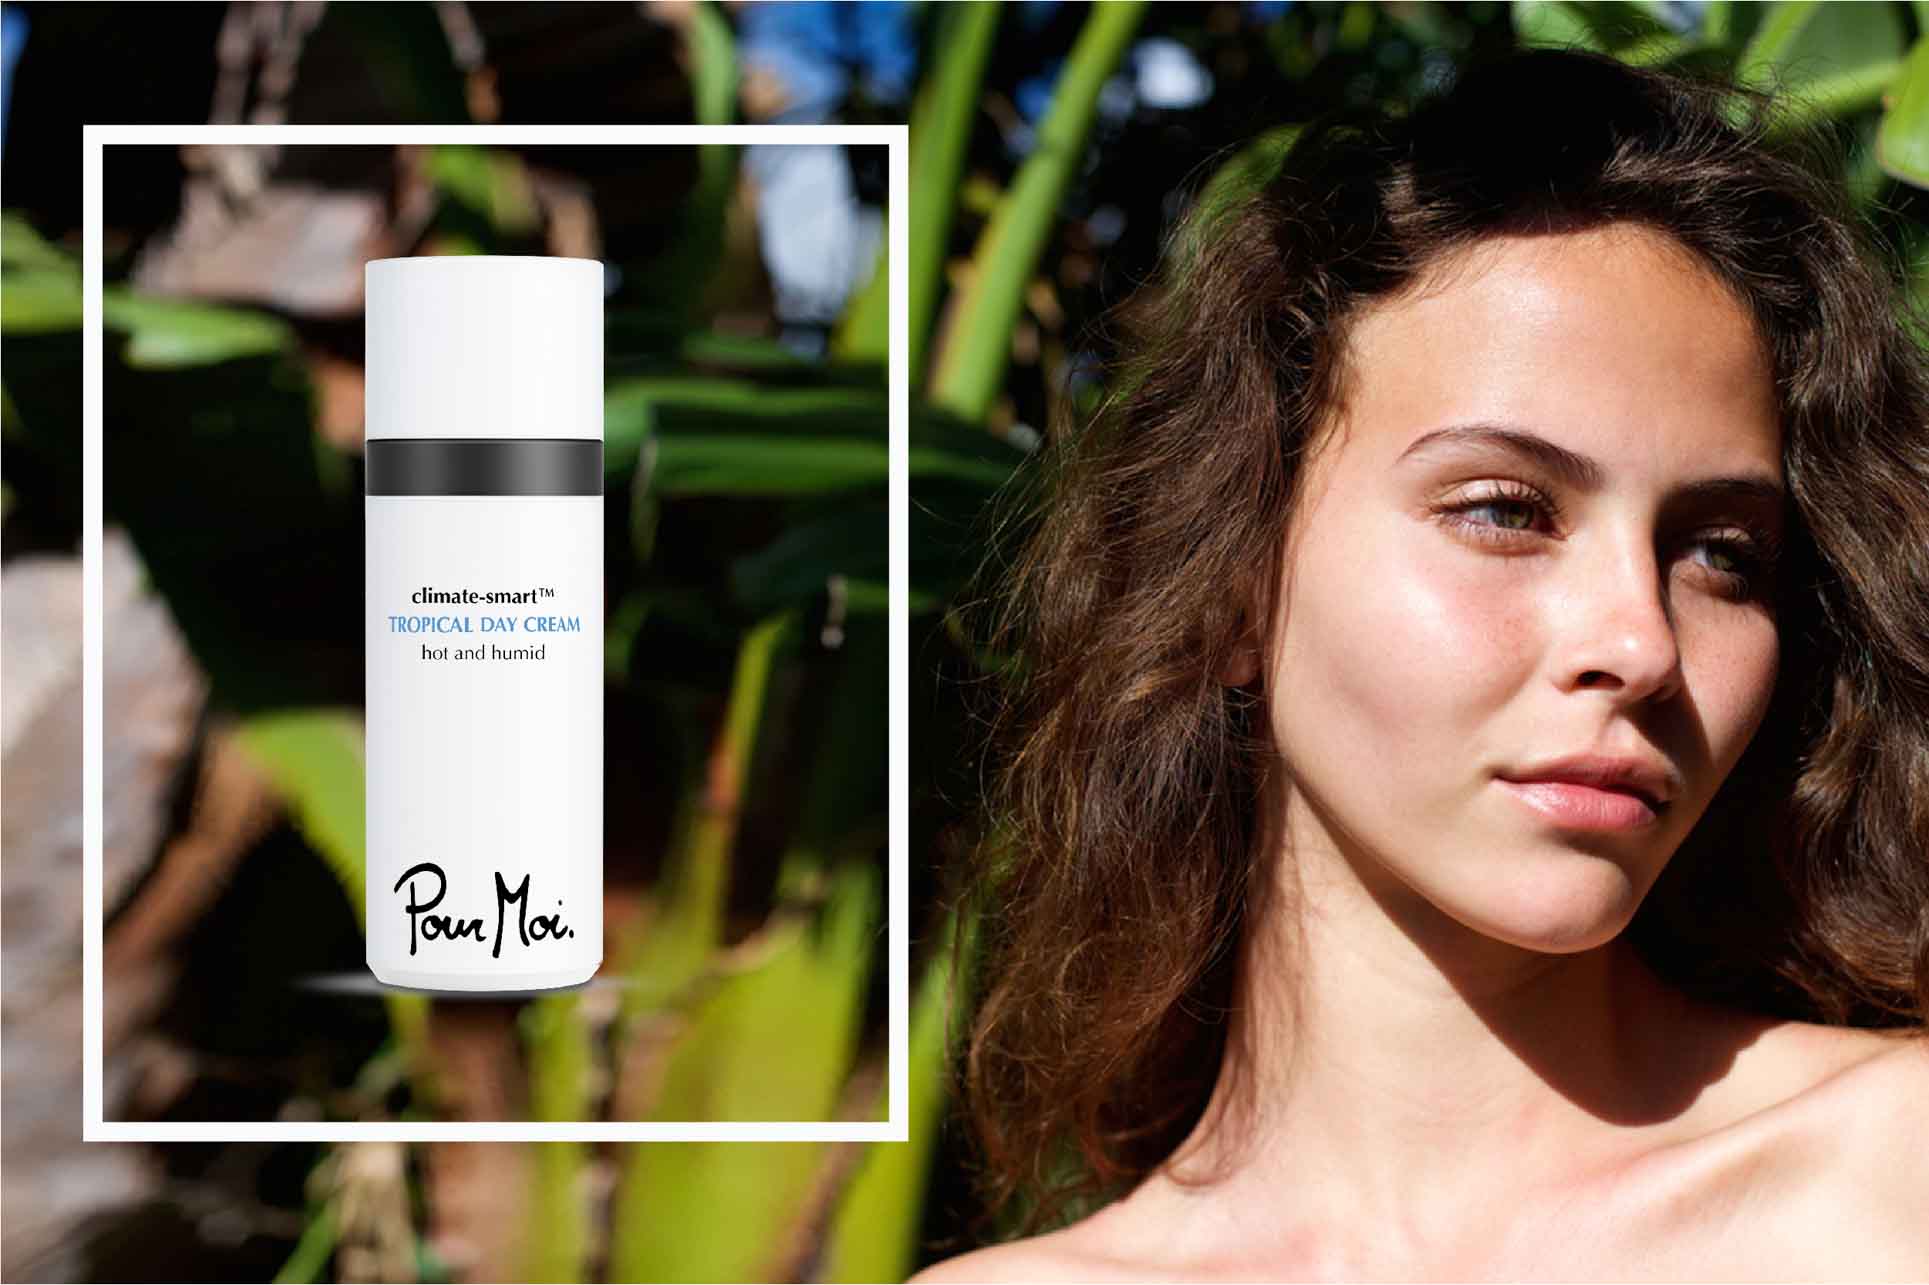 Meet the Tropical Day Cream - Best Face Moisturizer for Oily Skin